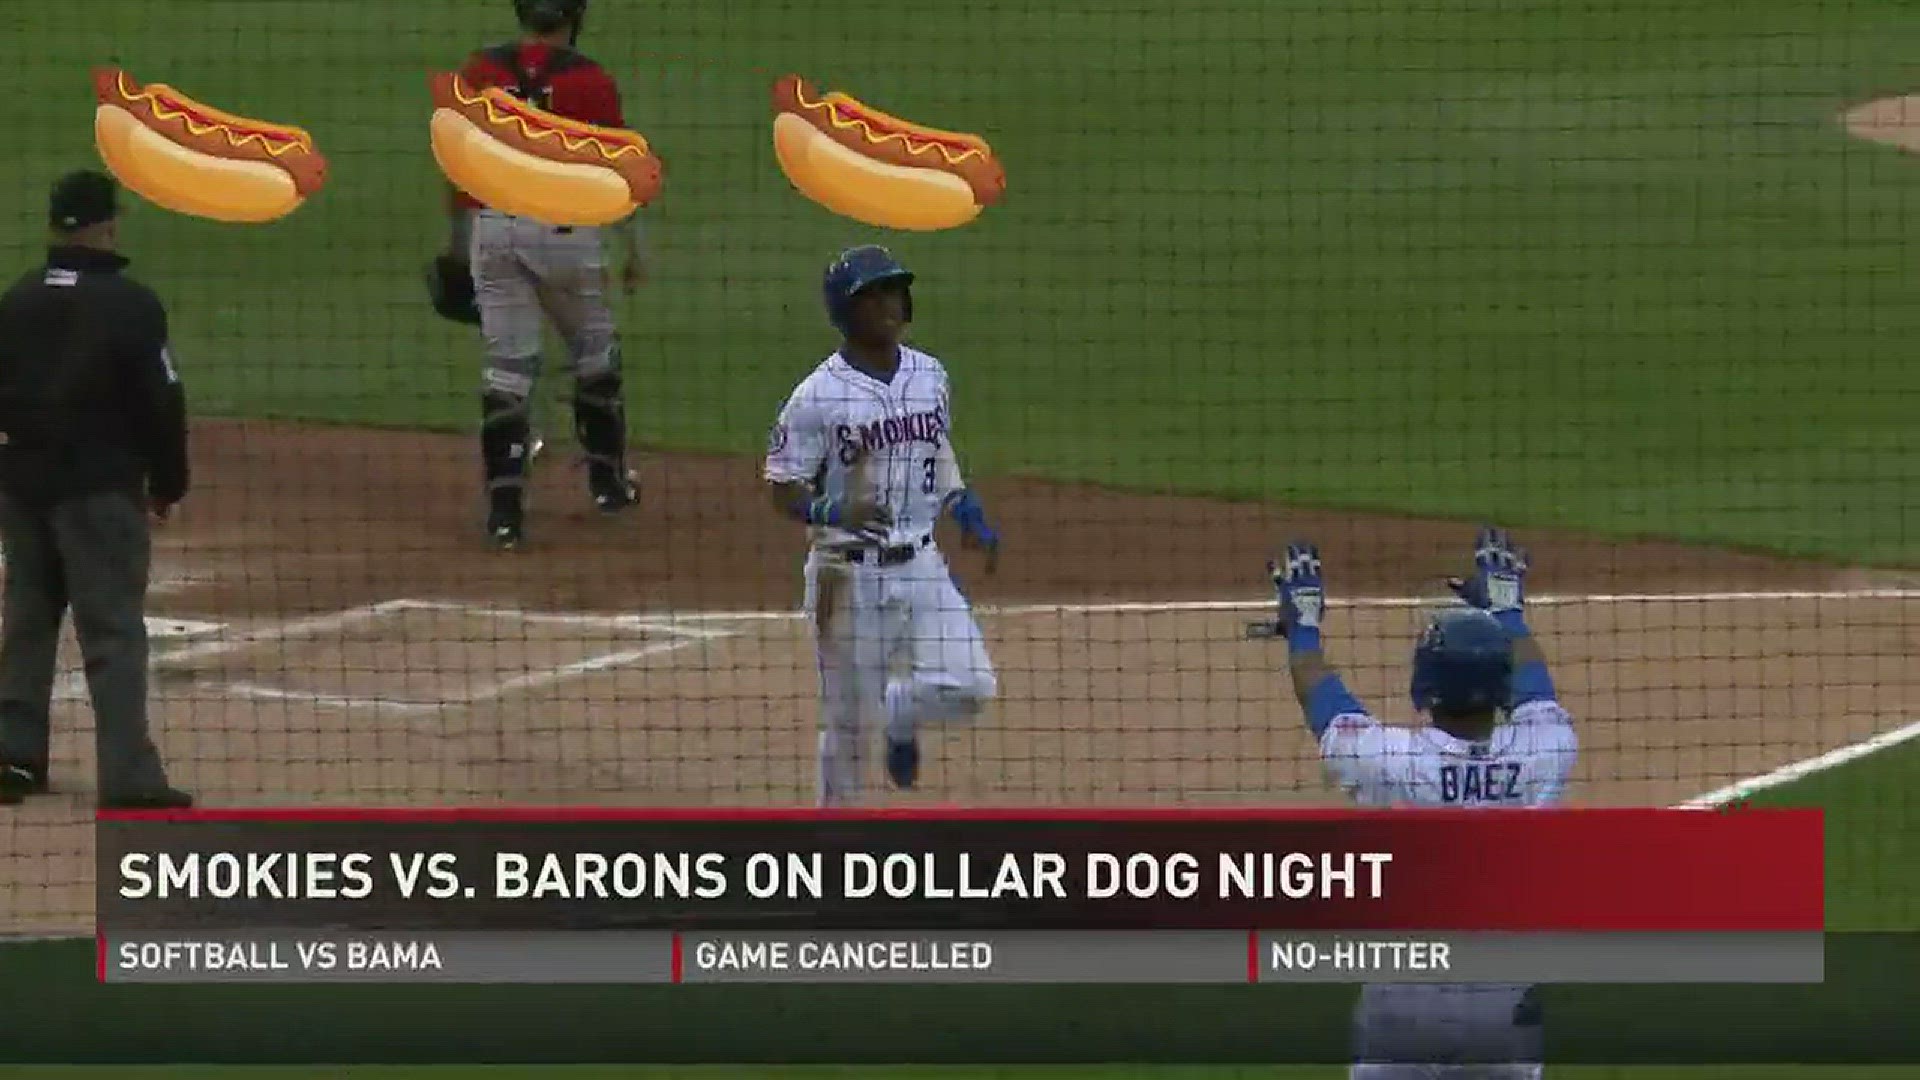 Smokies explode in the bottom of the second, go on to shutout Barons.